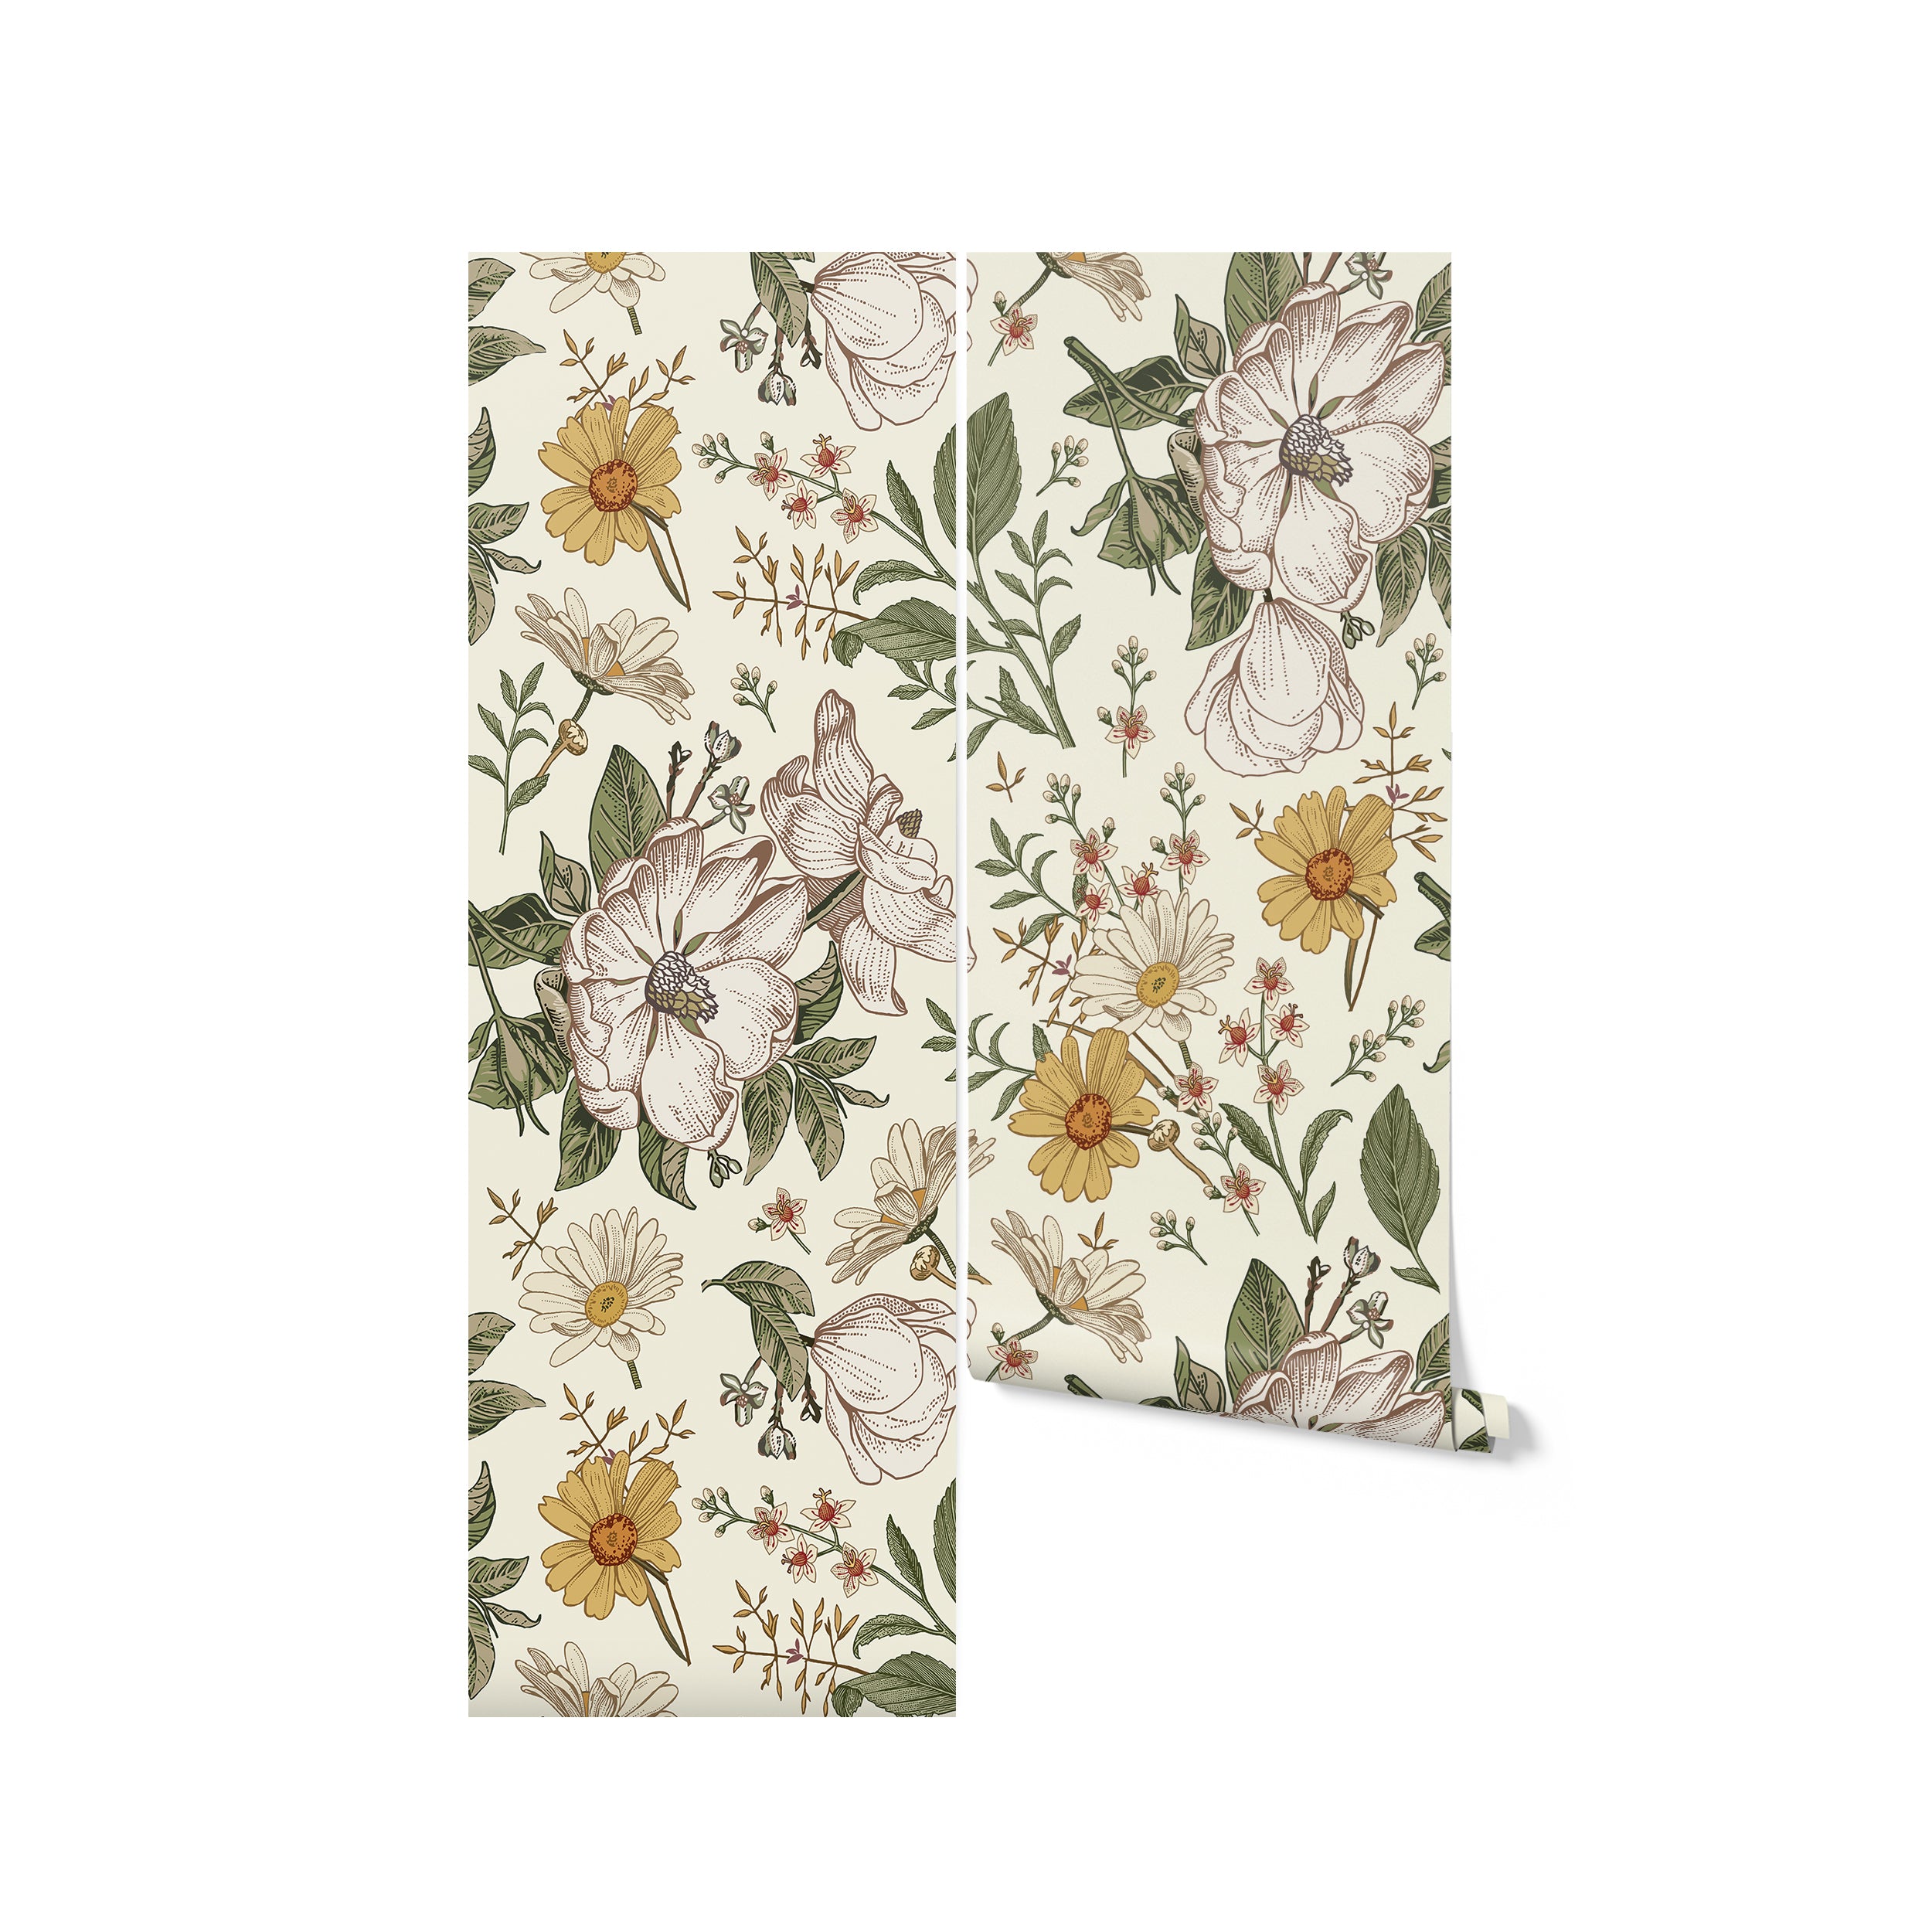 A sample of Floral Wallpaper - Sunny rolled partway out, showing the detailed floral design with prominent magnolia and daisy illustrations set against a subtle cream backdrop, perfect for those looking to infuse their space with a bright and cheerful botanical aesthetic.